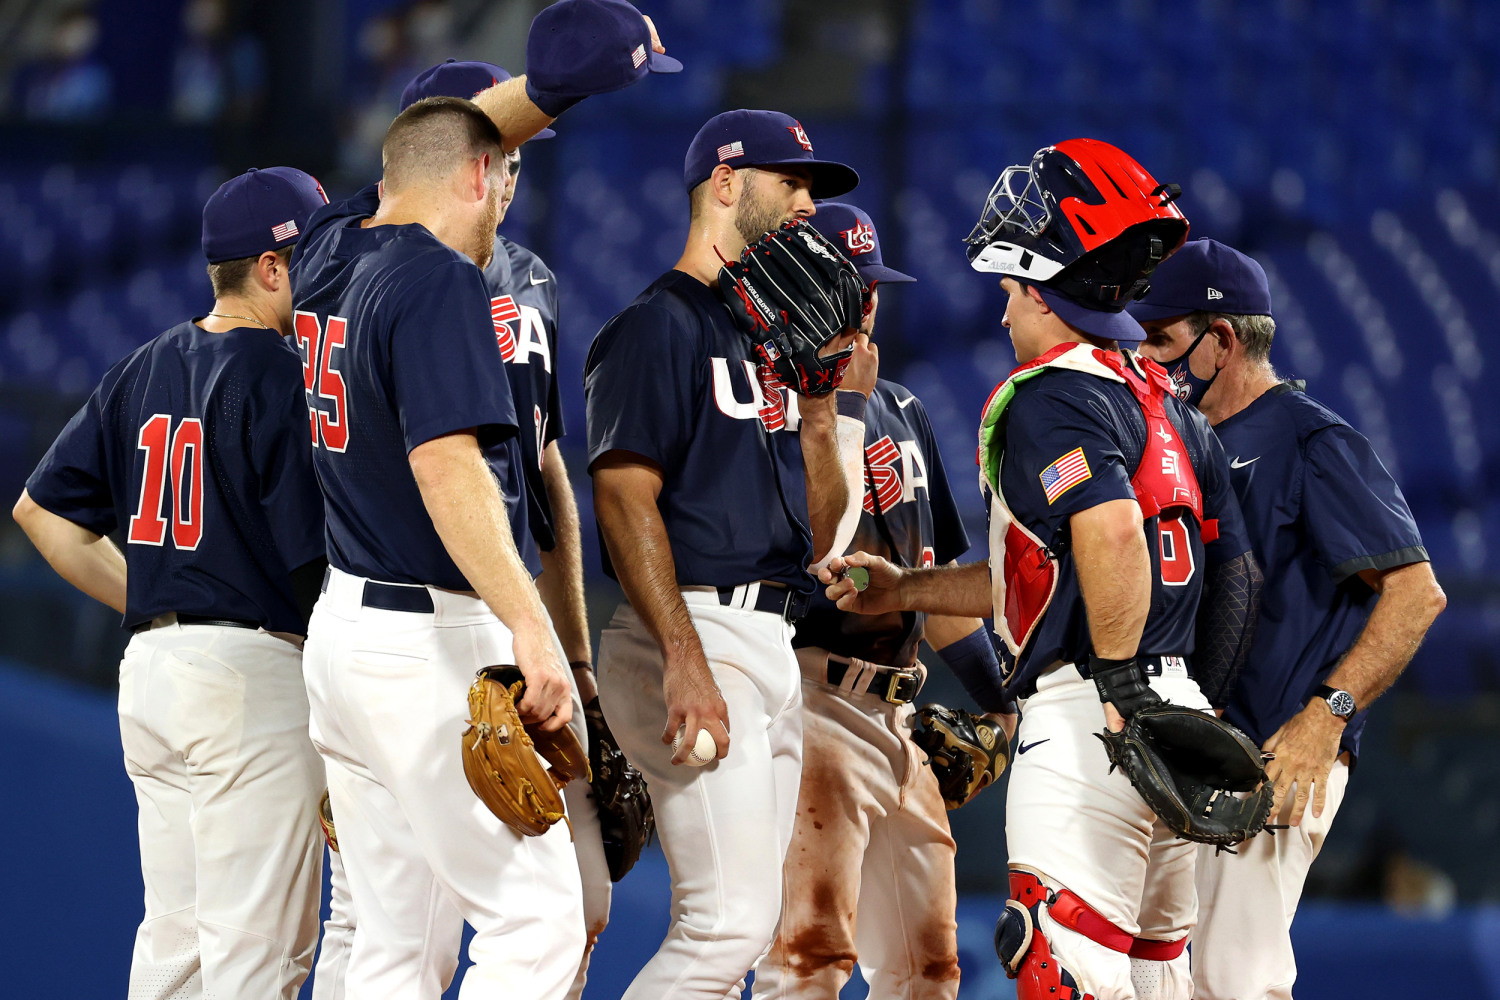 Team USA shut out by Japan, settles for baseball silver as hosts